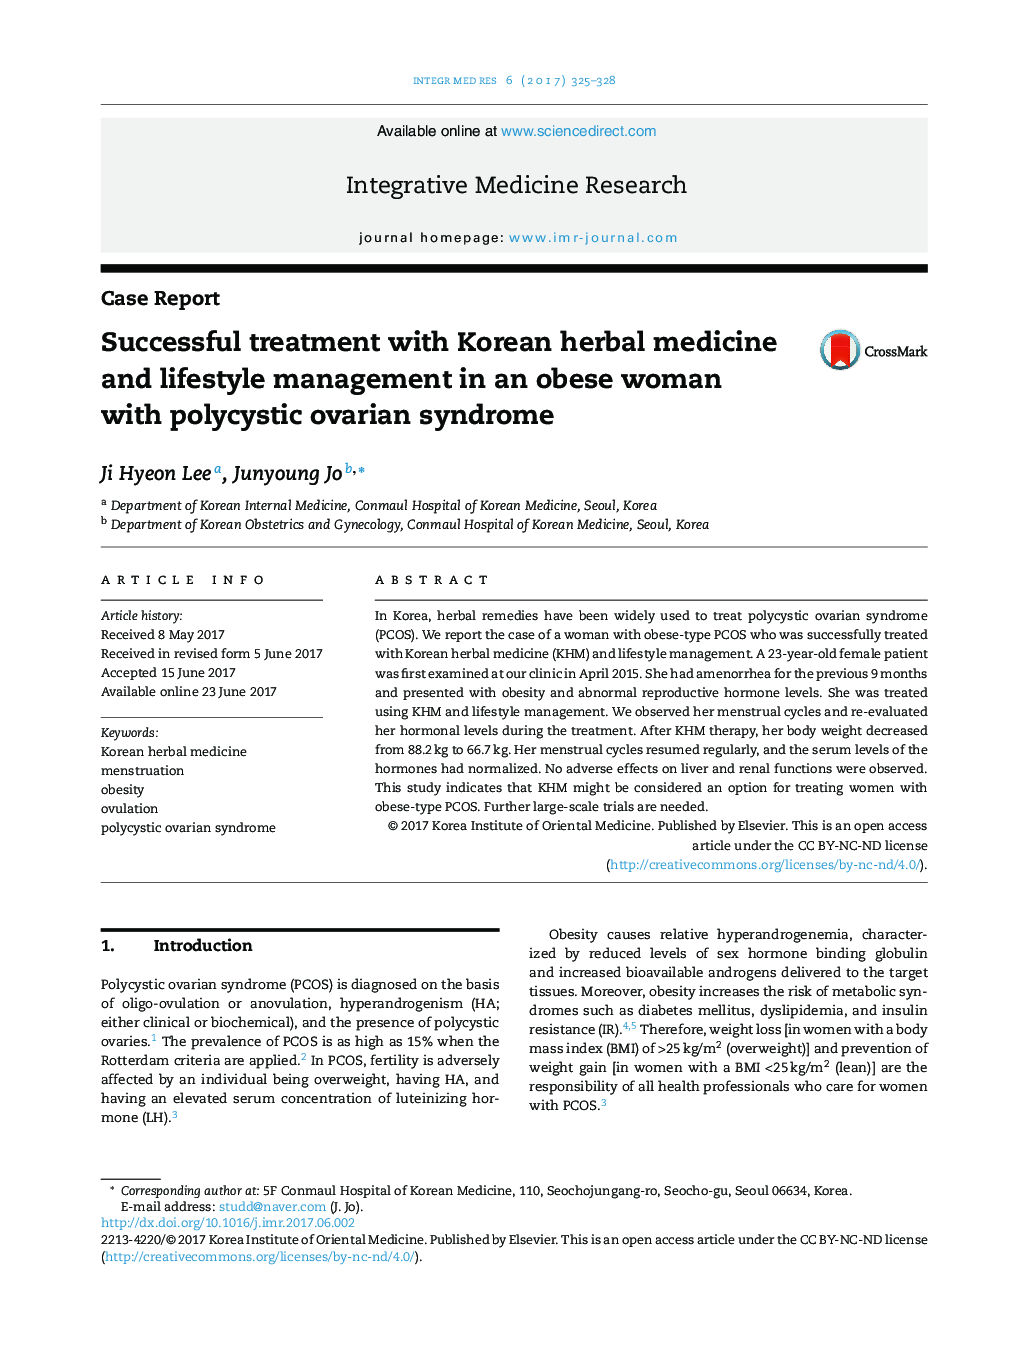 Successful treatment with Korean herbal medicine and lifestyle management in an obese woman with polycystic ovarian syndrome